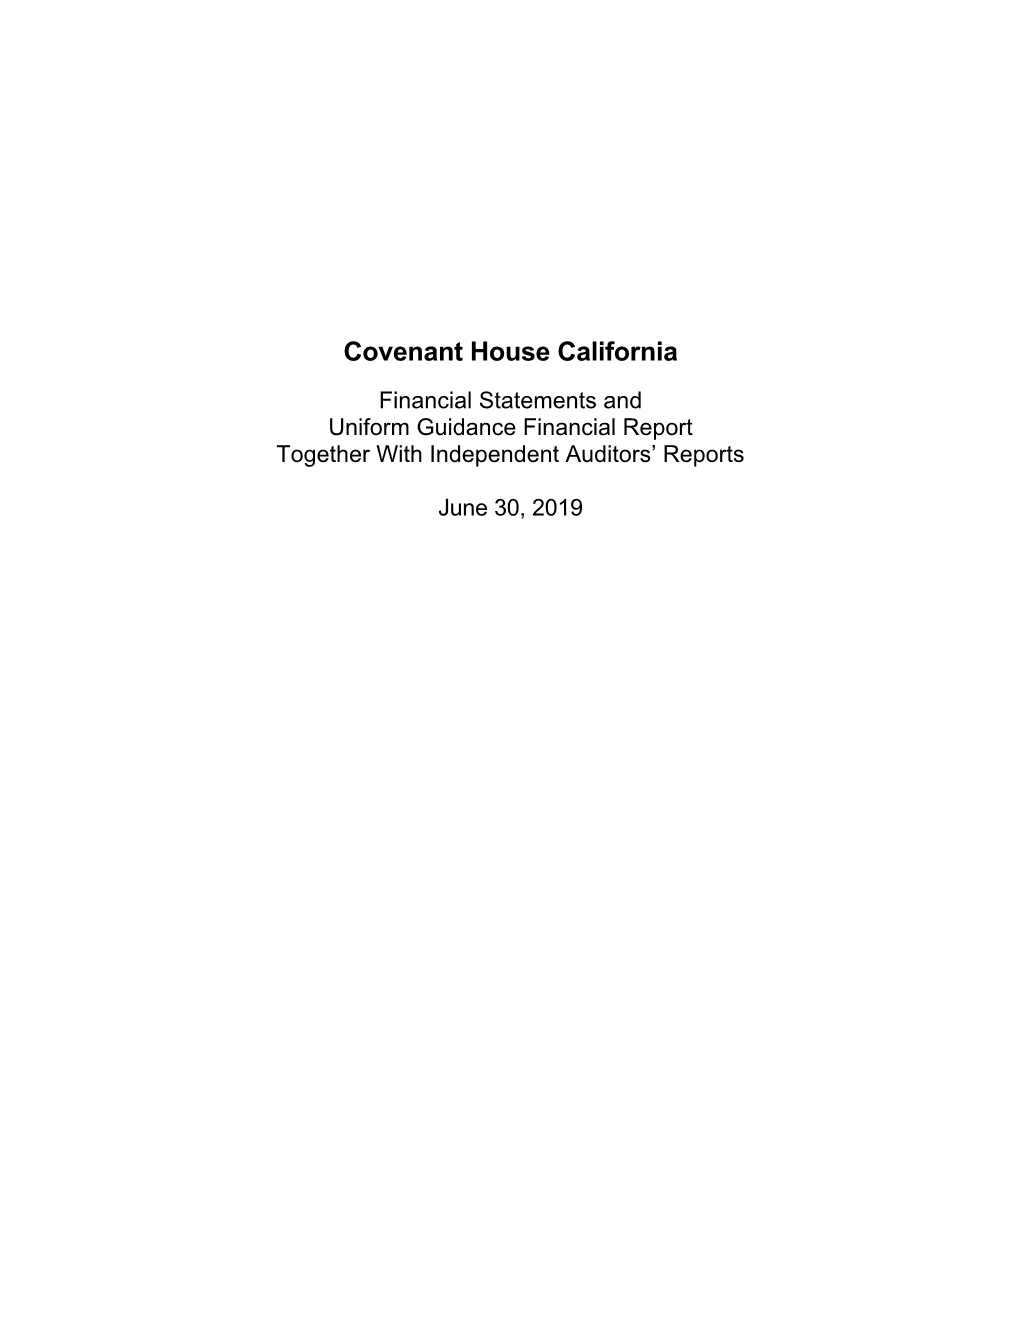 Covenant House California – FY 2019 Audited Financials and 1 A-133 Reports